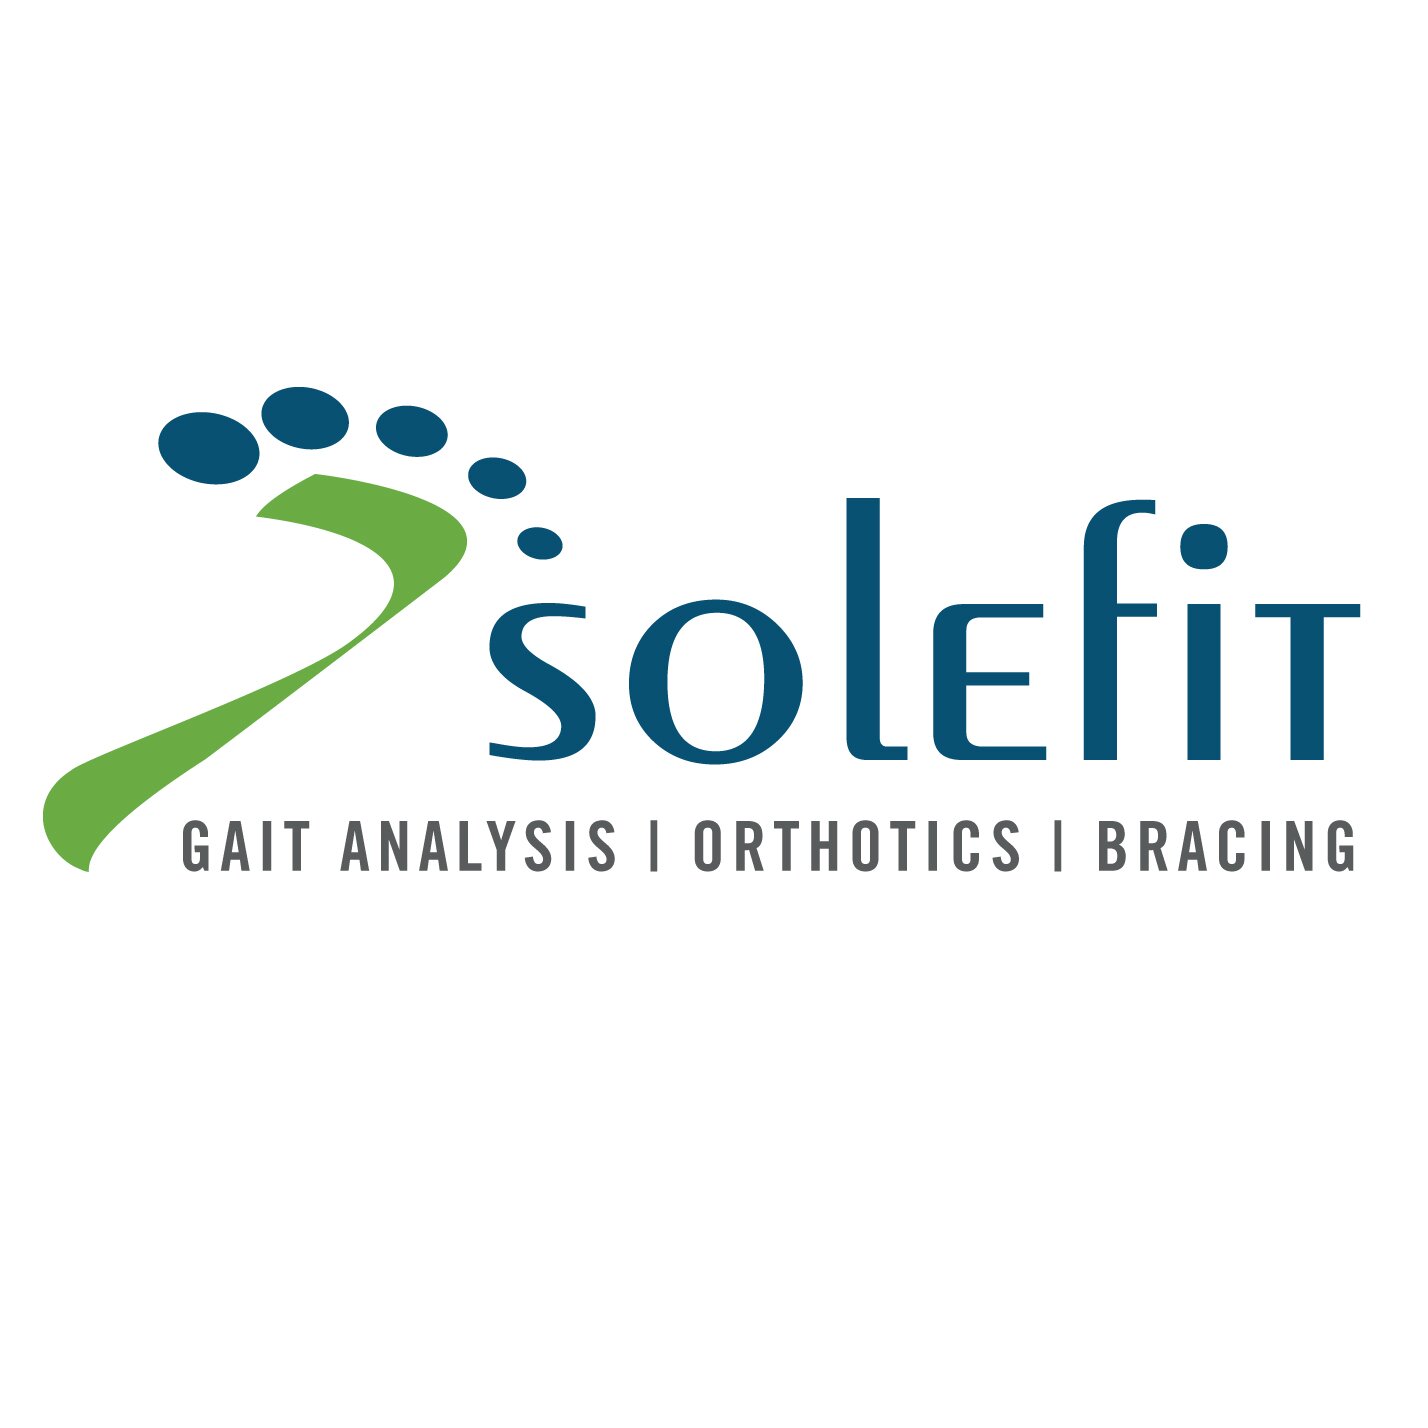 More about Solefit